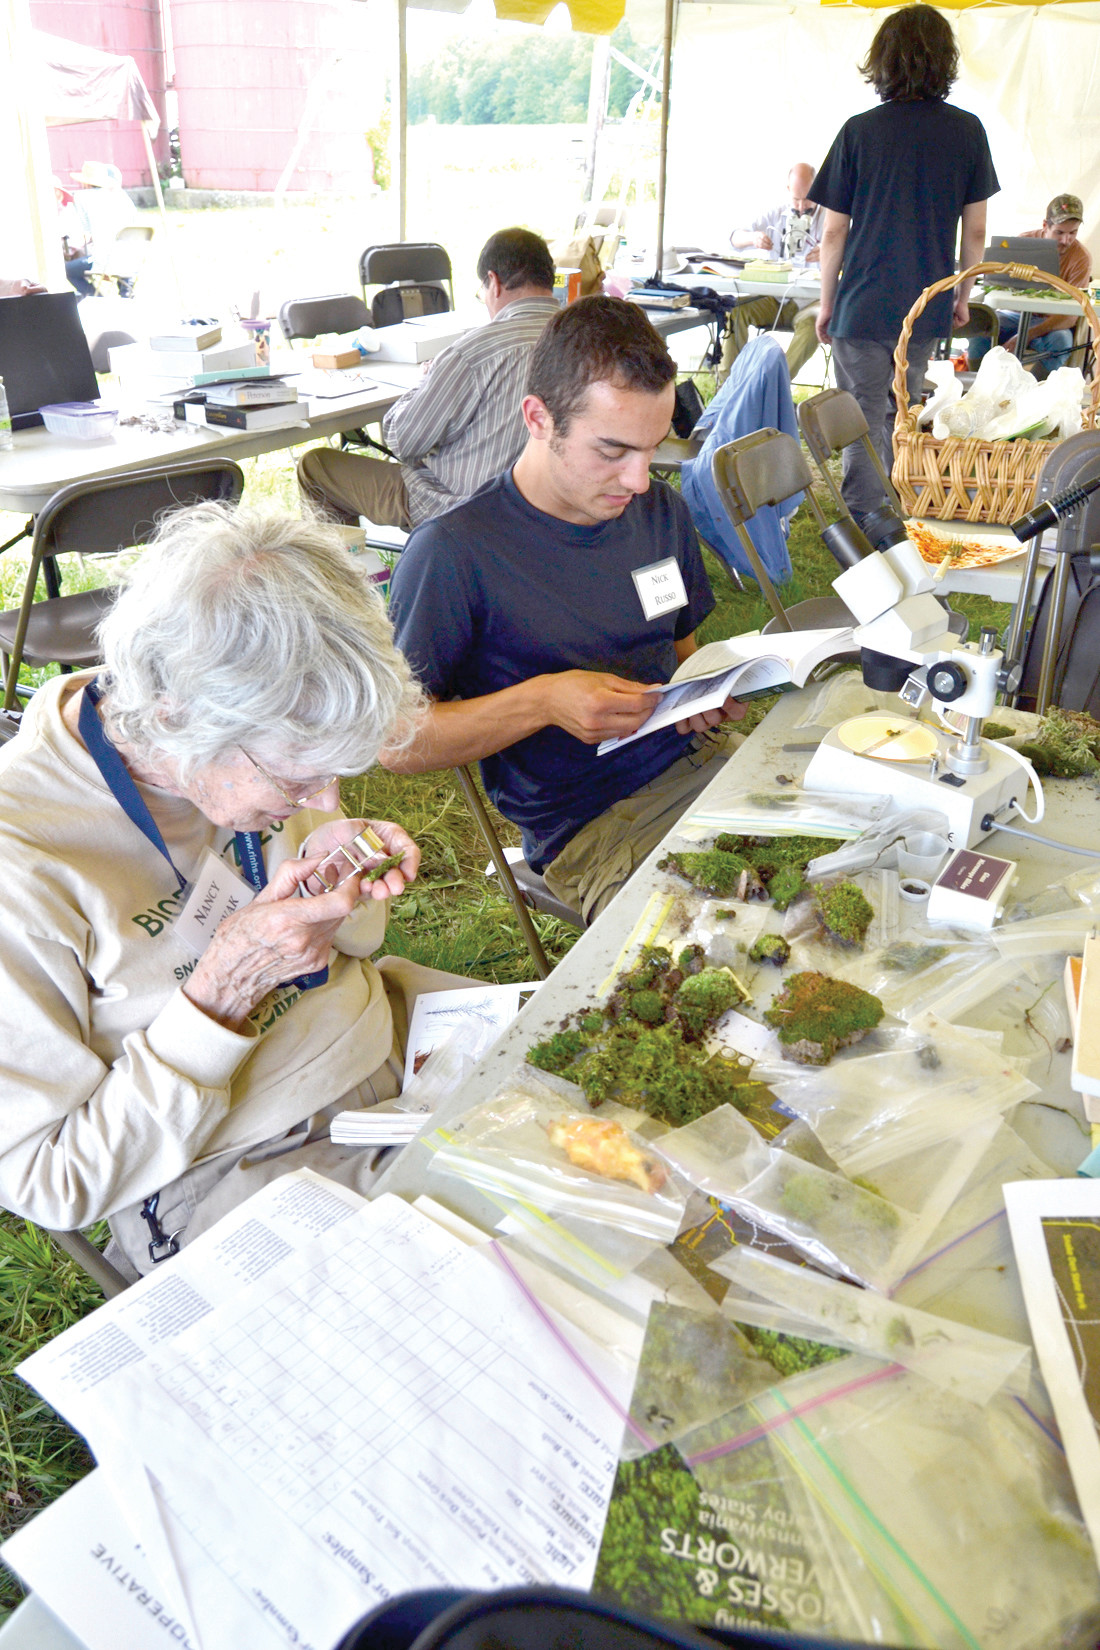 MANAGING MOSS: Nancy Nowak and Nick Russo catalogue some of the mosses found during the BioBlitz.